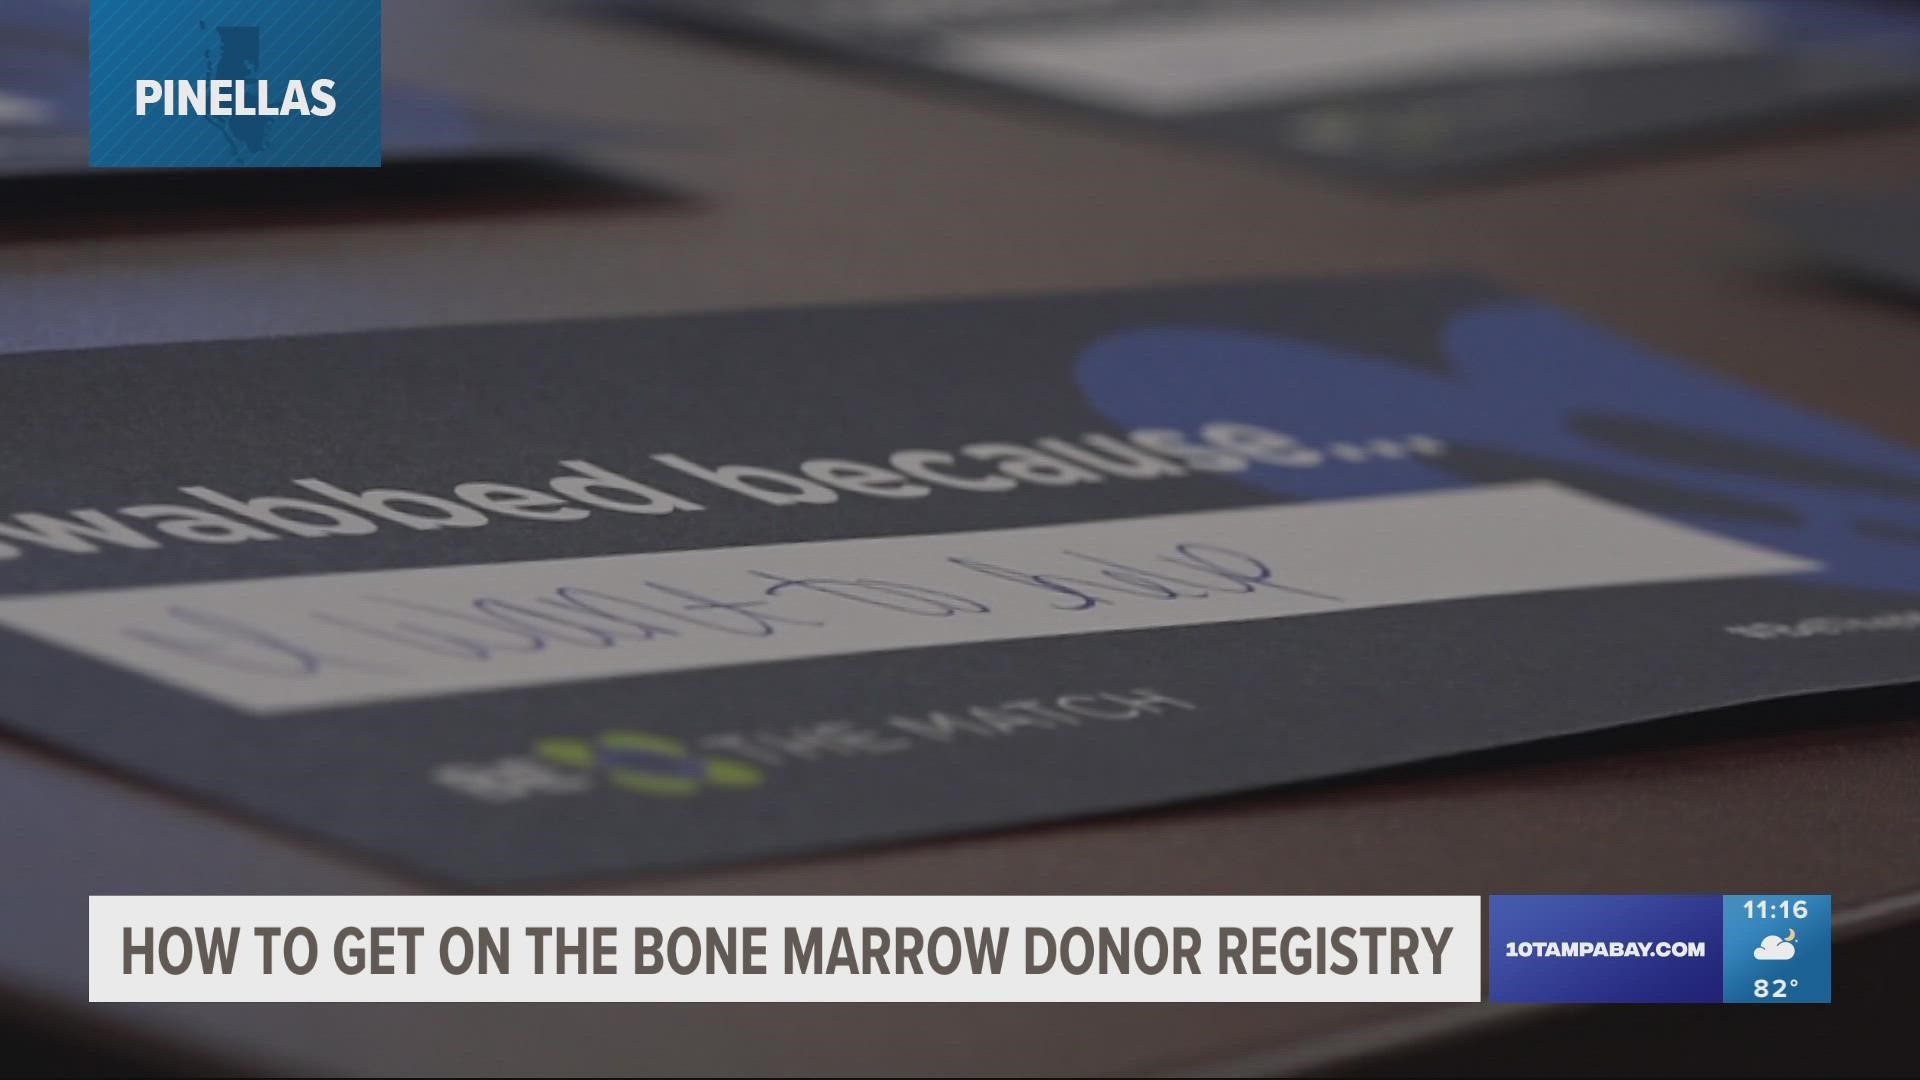 Be the Match will be at several Tampa Bay area hospitals this week allowing people to get on the registry.